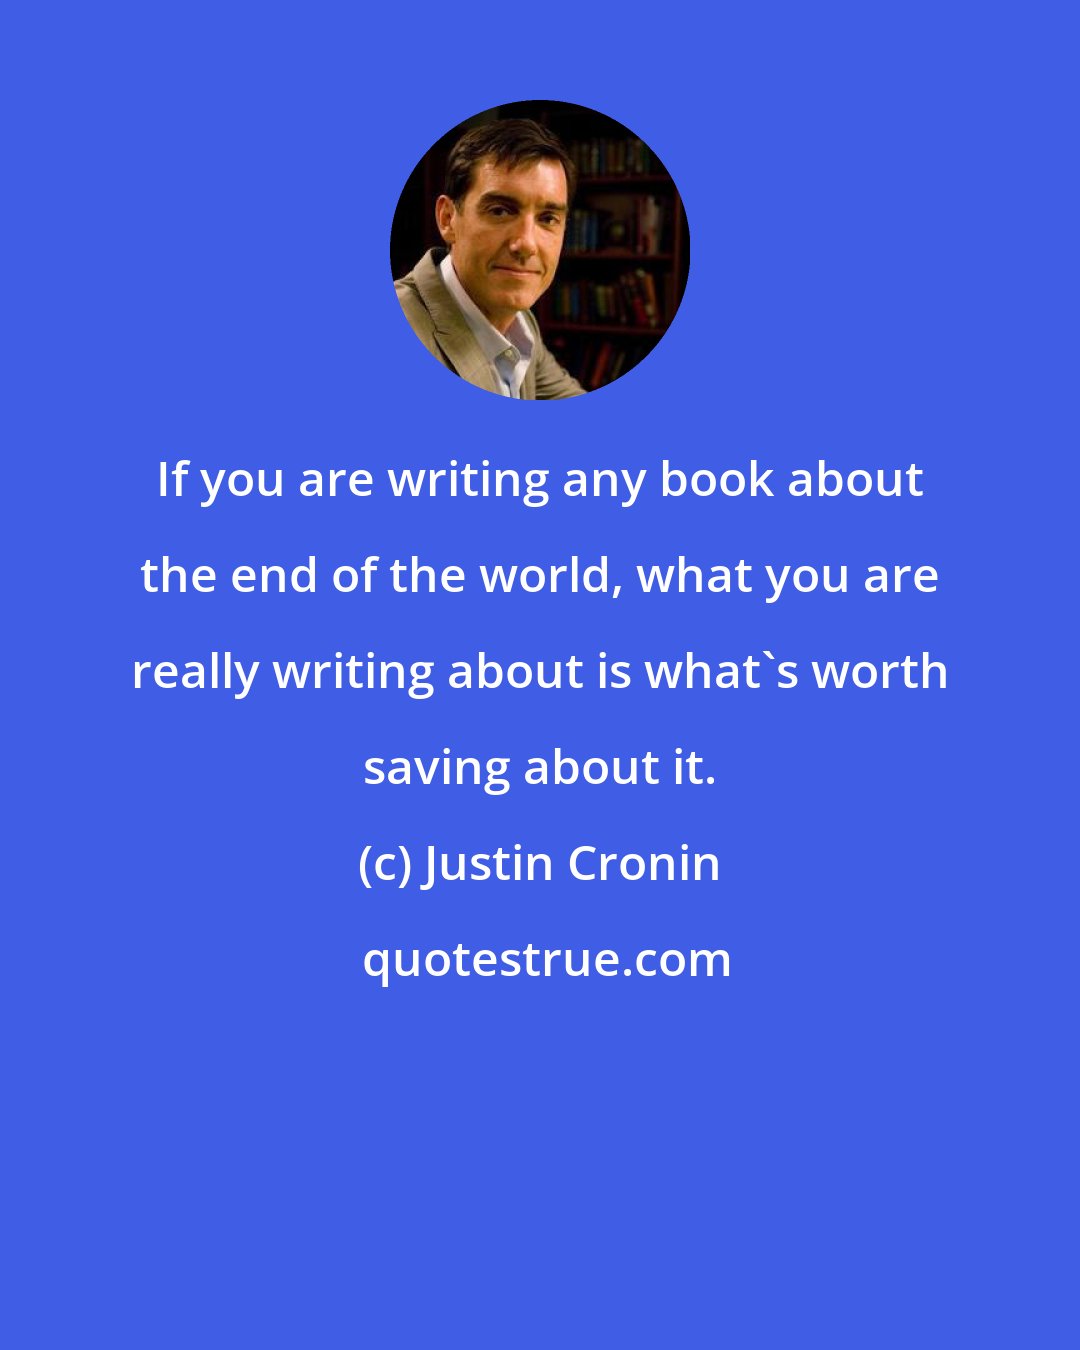 Justin Cronin: If you are writing any book about the end of the world, what you are really writing about is what's worth saving about it.